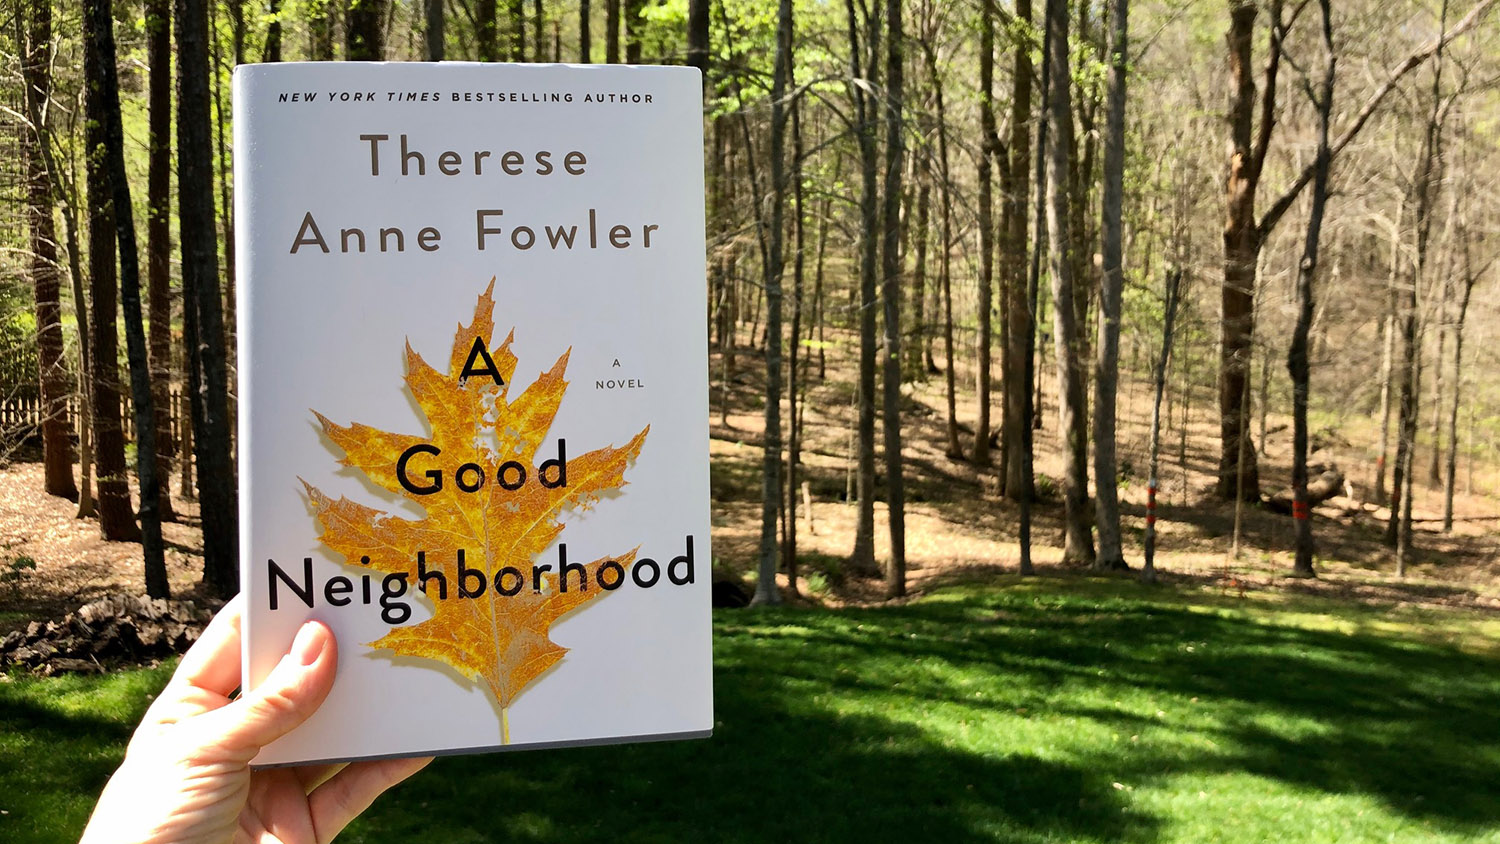 A hand holds Therese Anne Fowler's book "A Good Neighborhood" outside in a wooded area.